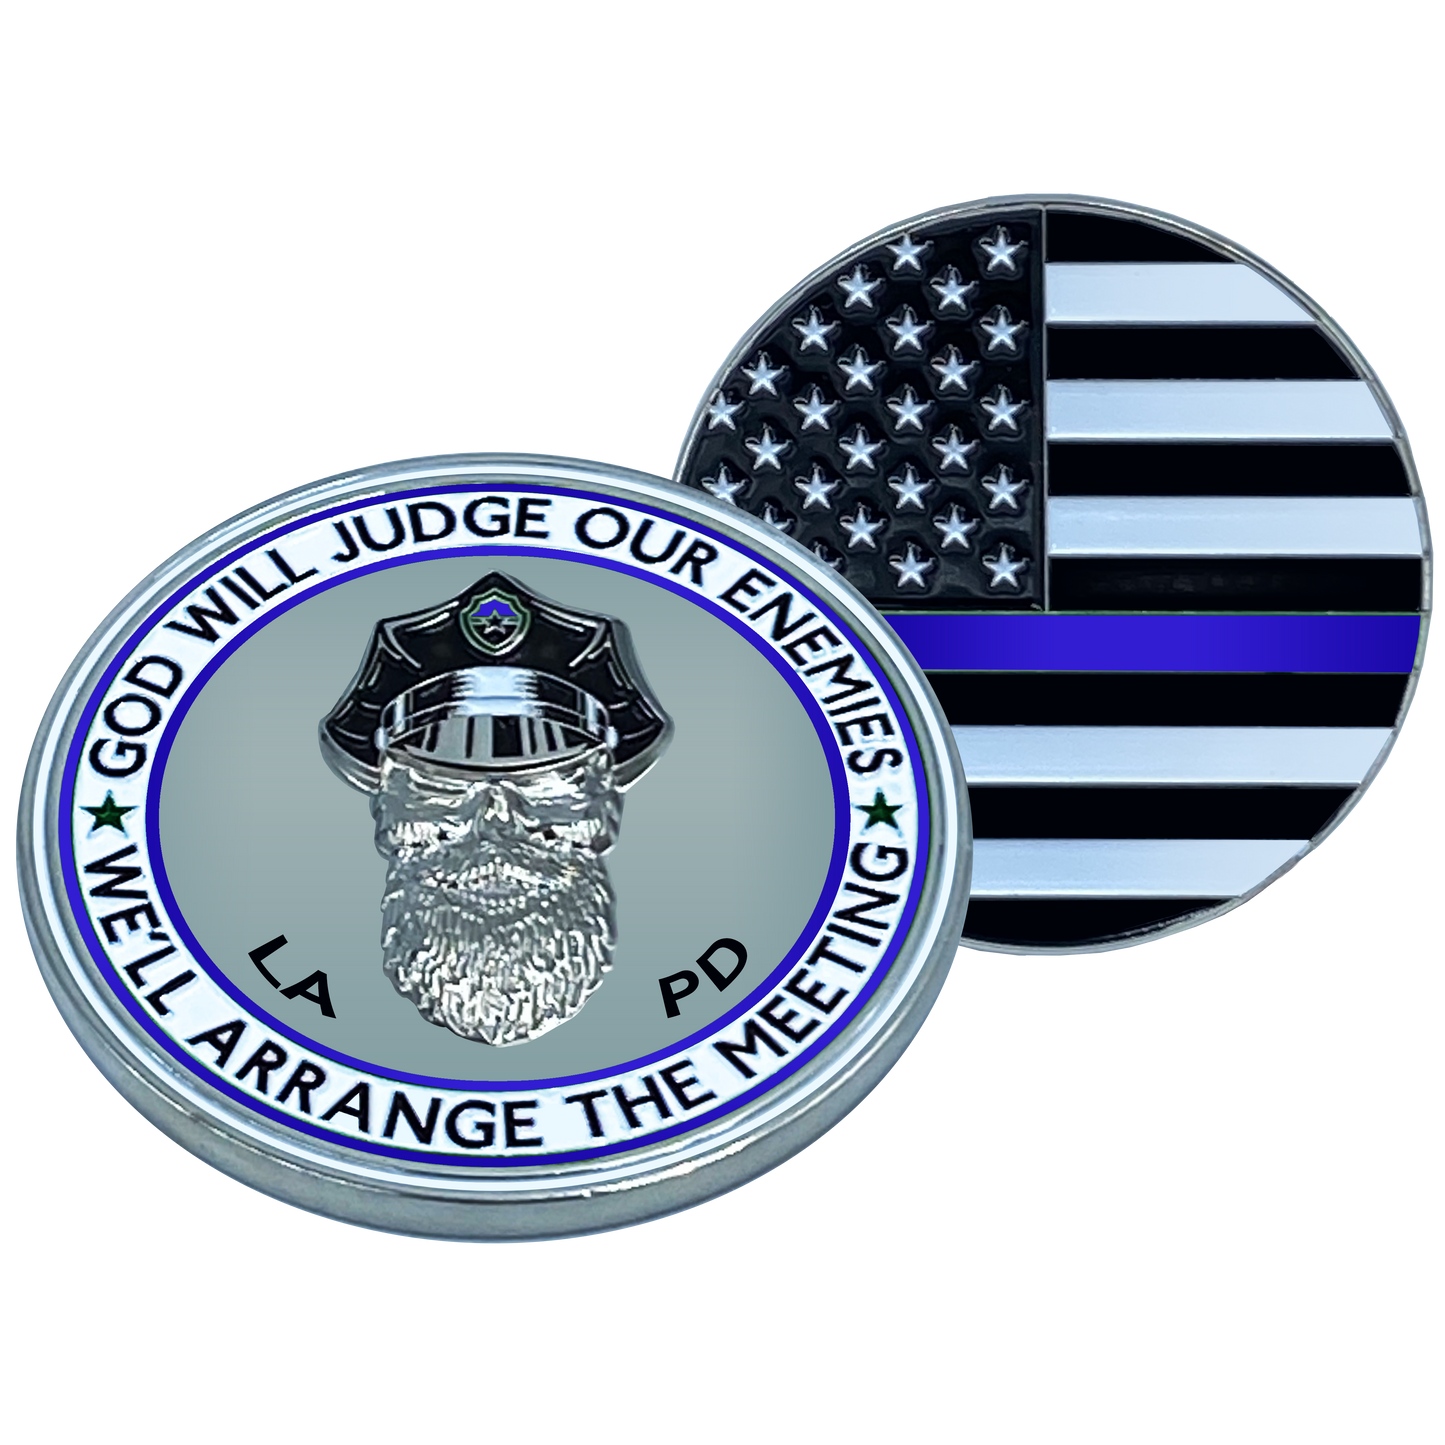 EL1-017 Thin Blue Line LAPD God Will Judge BEARD GANG SKULL Challenge Coin LOS ANGELES POLICE DEPARTMENT Back the Blue